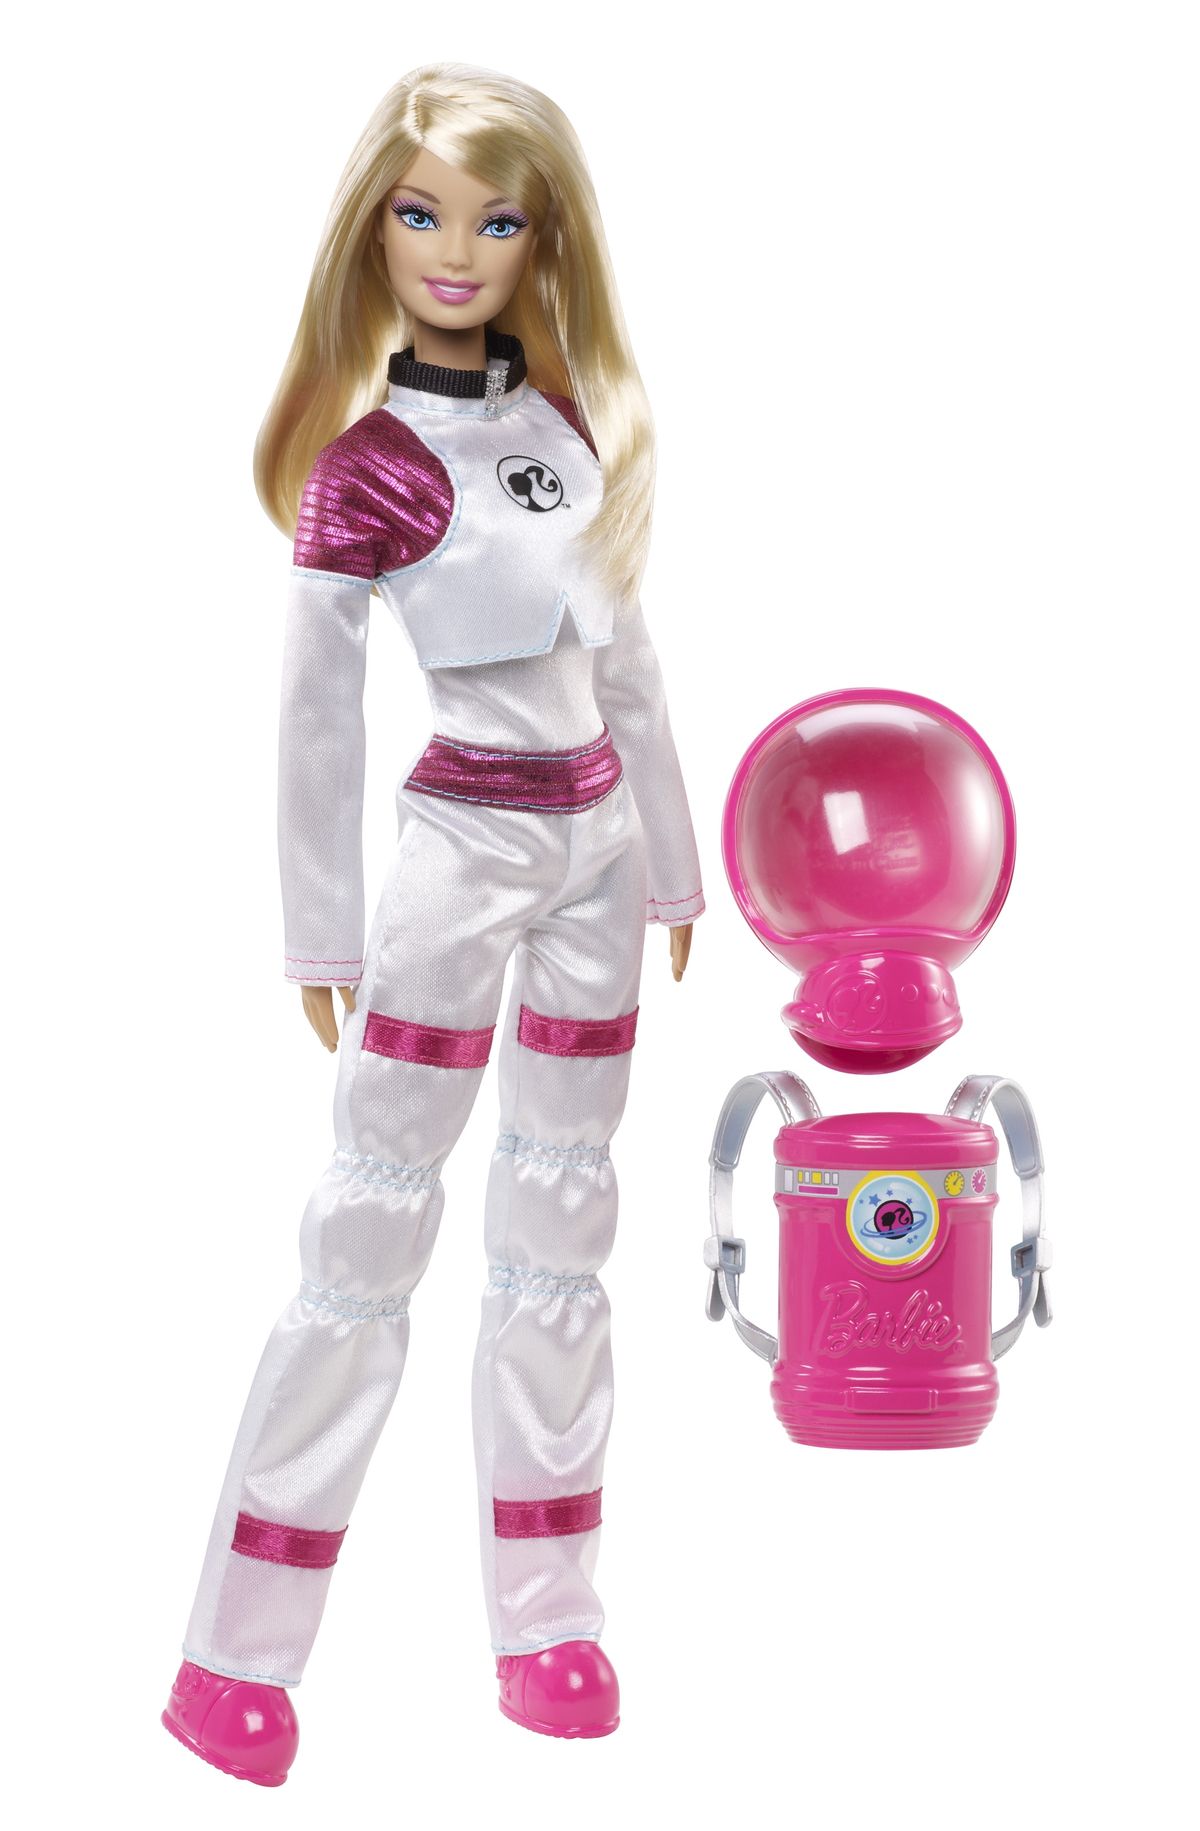 barbie astronaut and space scientist